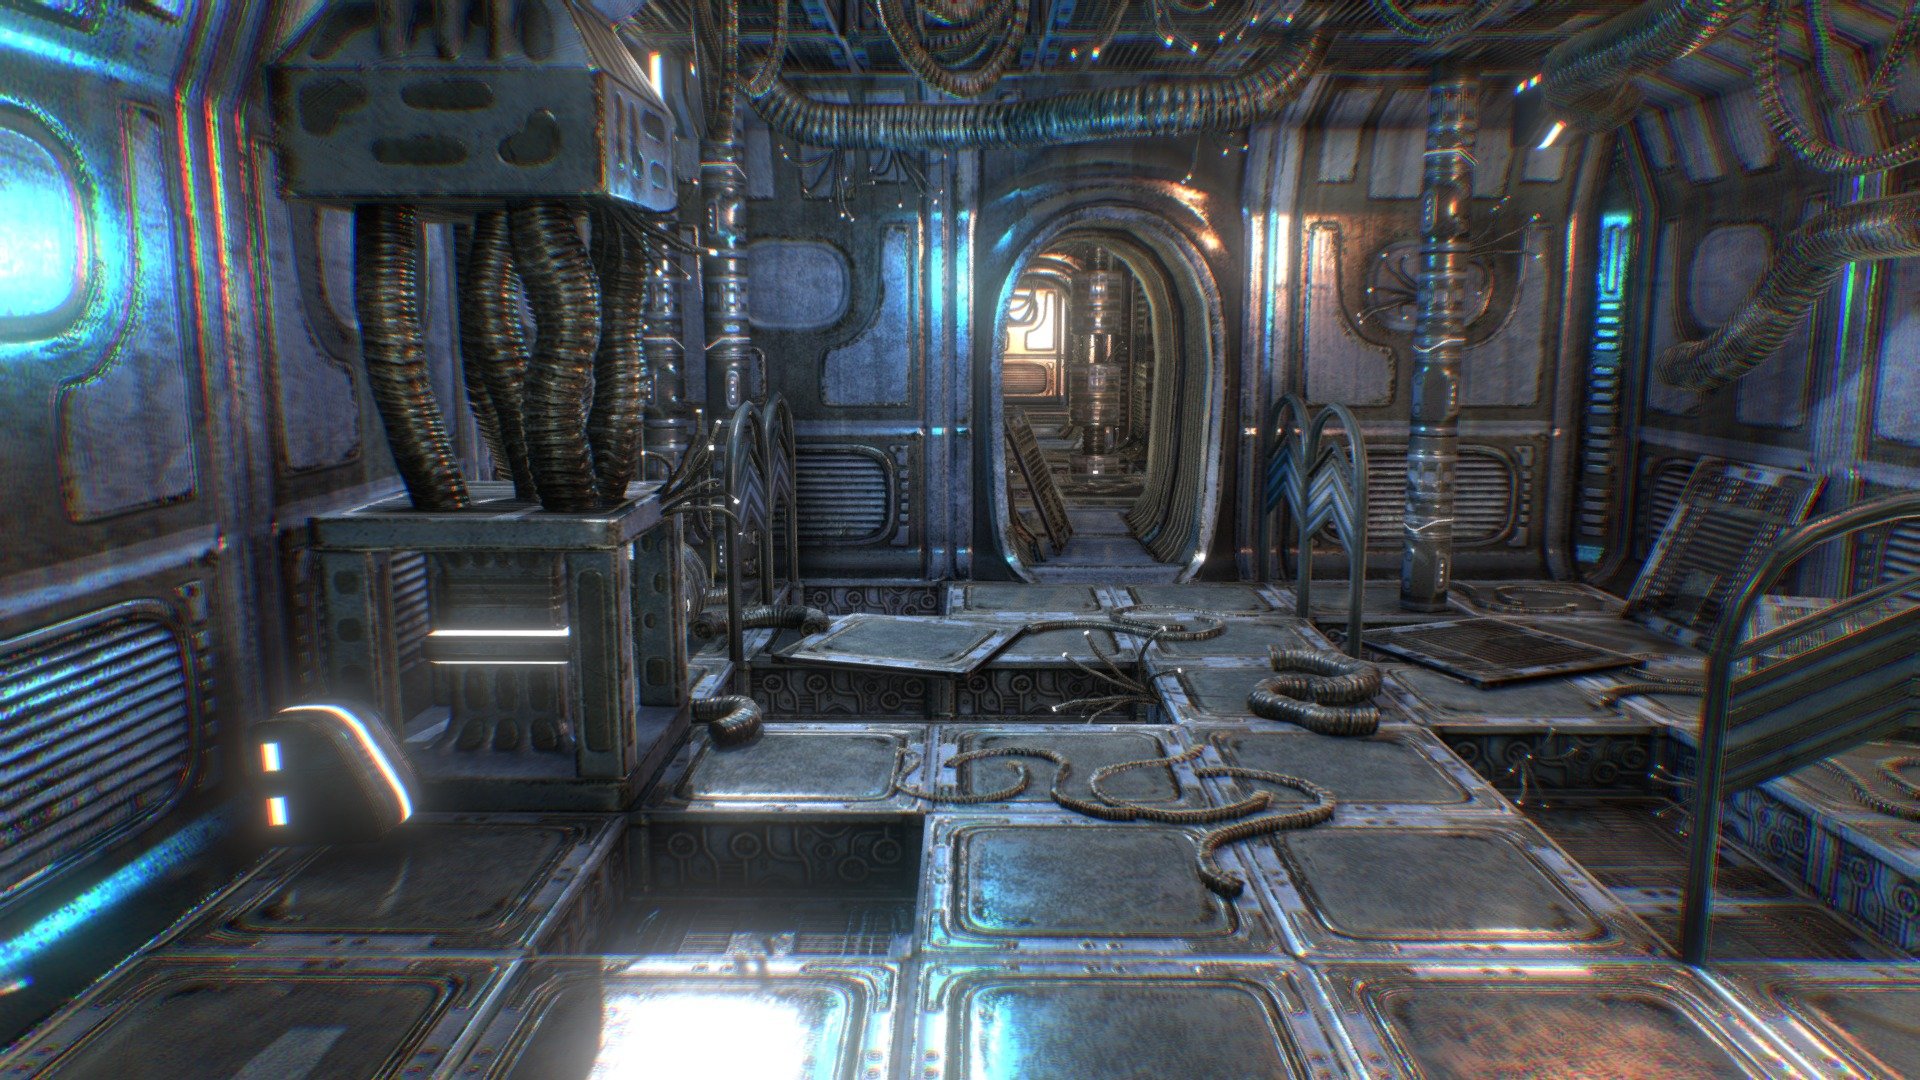 Modular sci-fi level example. You can buy the asset here: https://sketchfab.com/3d-models/modular-sci-fi-rooms-original-concept-897a38db2ec0406ca611095d1050e712
And this is a better material + scene + light setting: https://youtu.be/QhOuXuTke-k
Note: this is a 12 years old work, so very lowpoly. But it looks cool. :) - Modular sci-fi level example - 3D model by endike 3d model